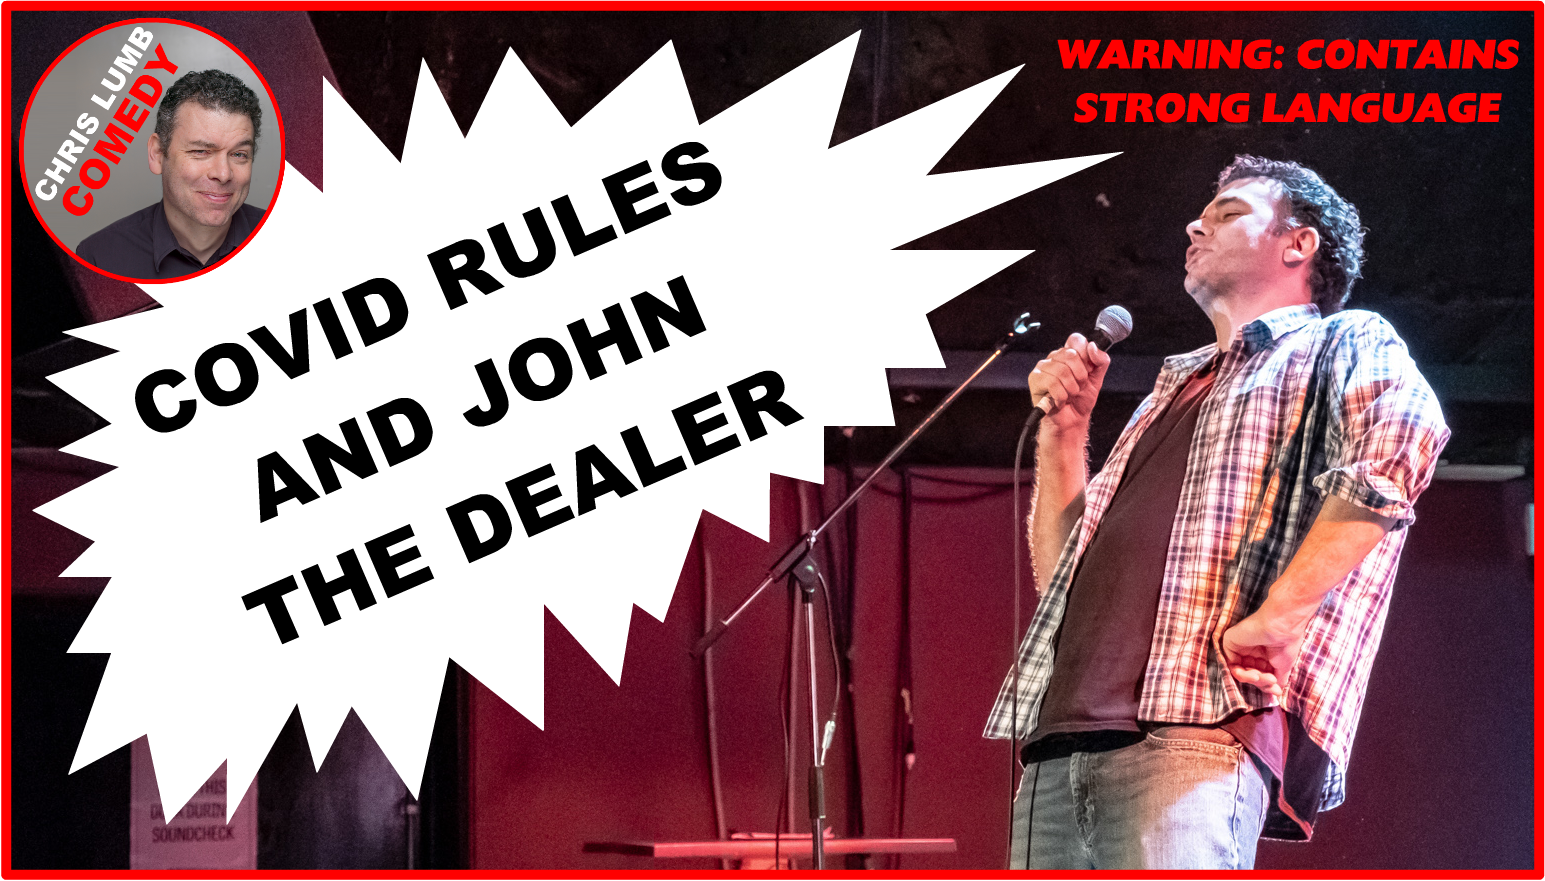 Chris Lumb Comedy "Covid Rules and John The Dealer"